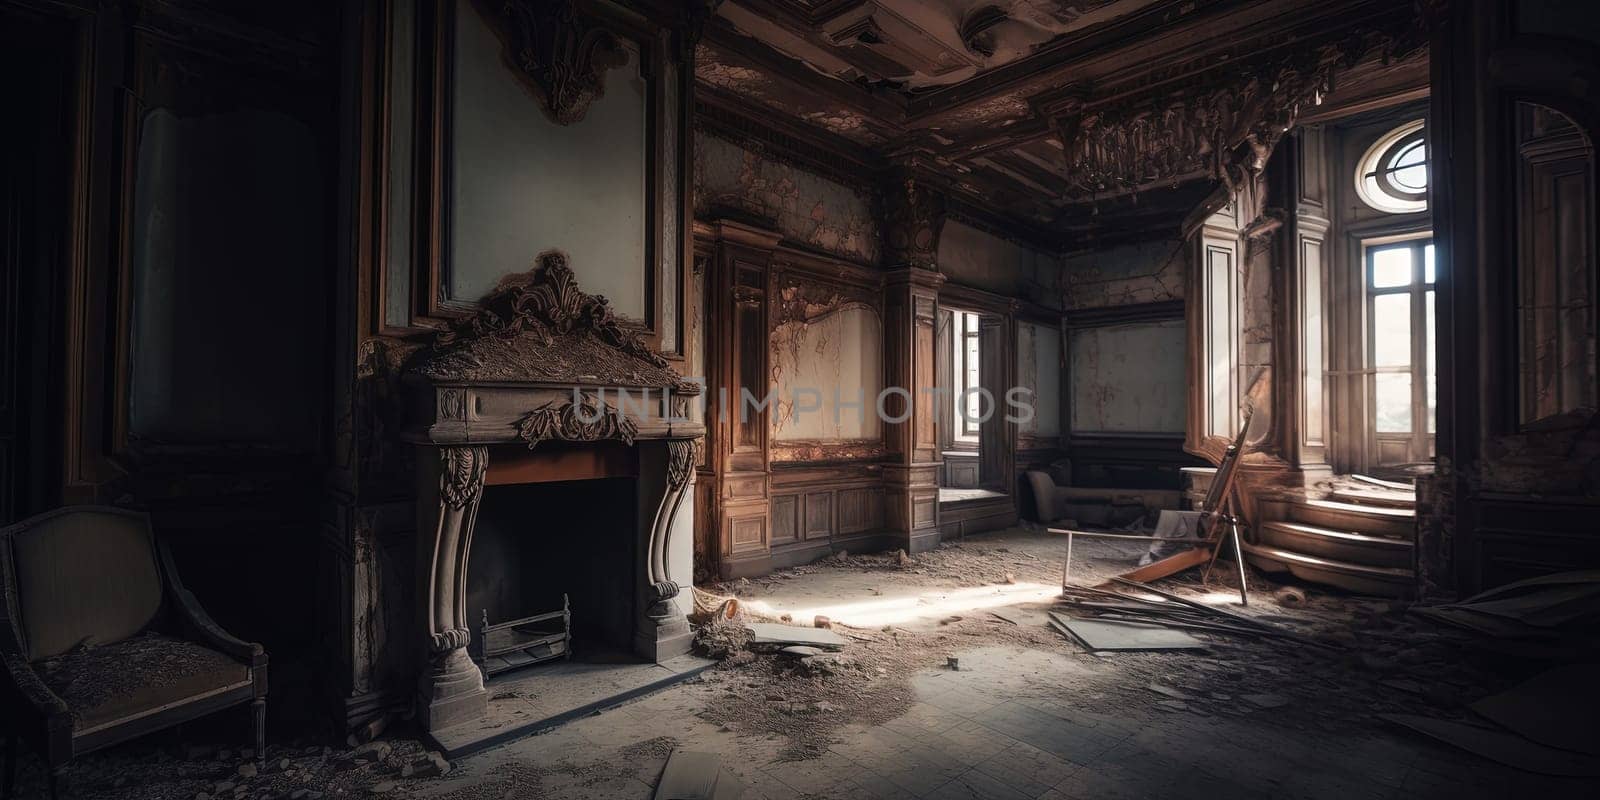 Abandoned Interior With Retro Vintage Decoration And Furniture